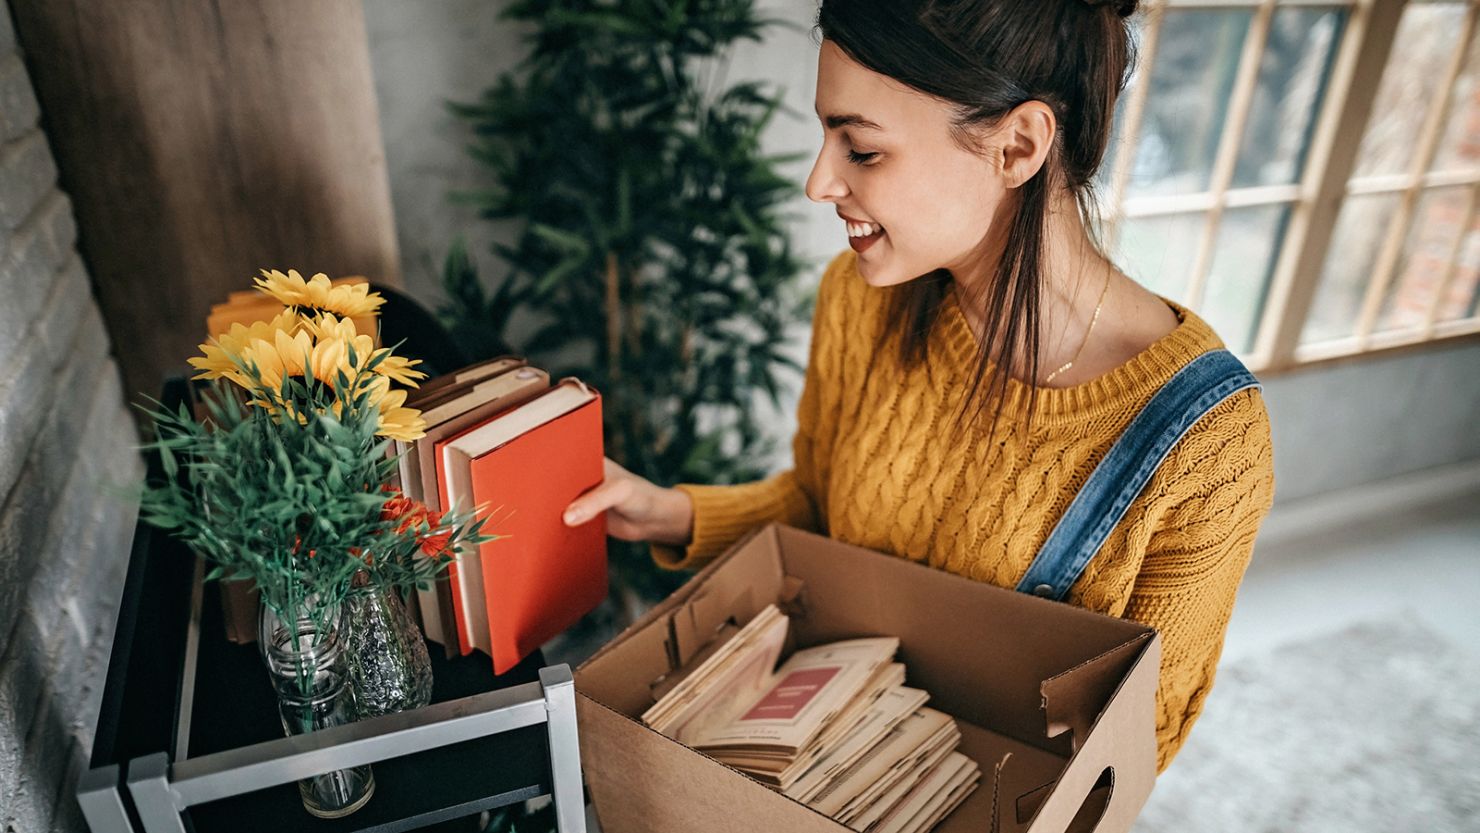 How to organize your life for less stress and clutter